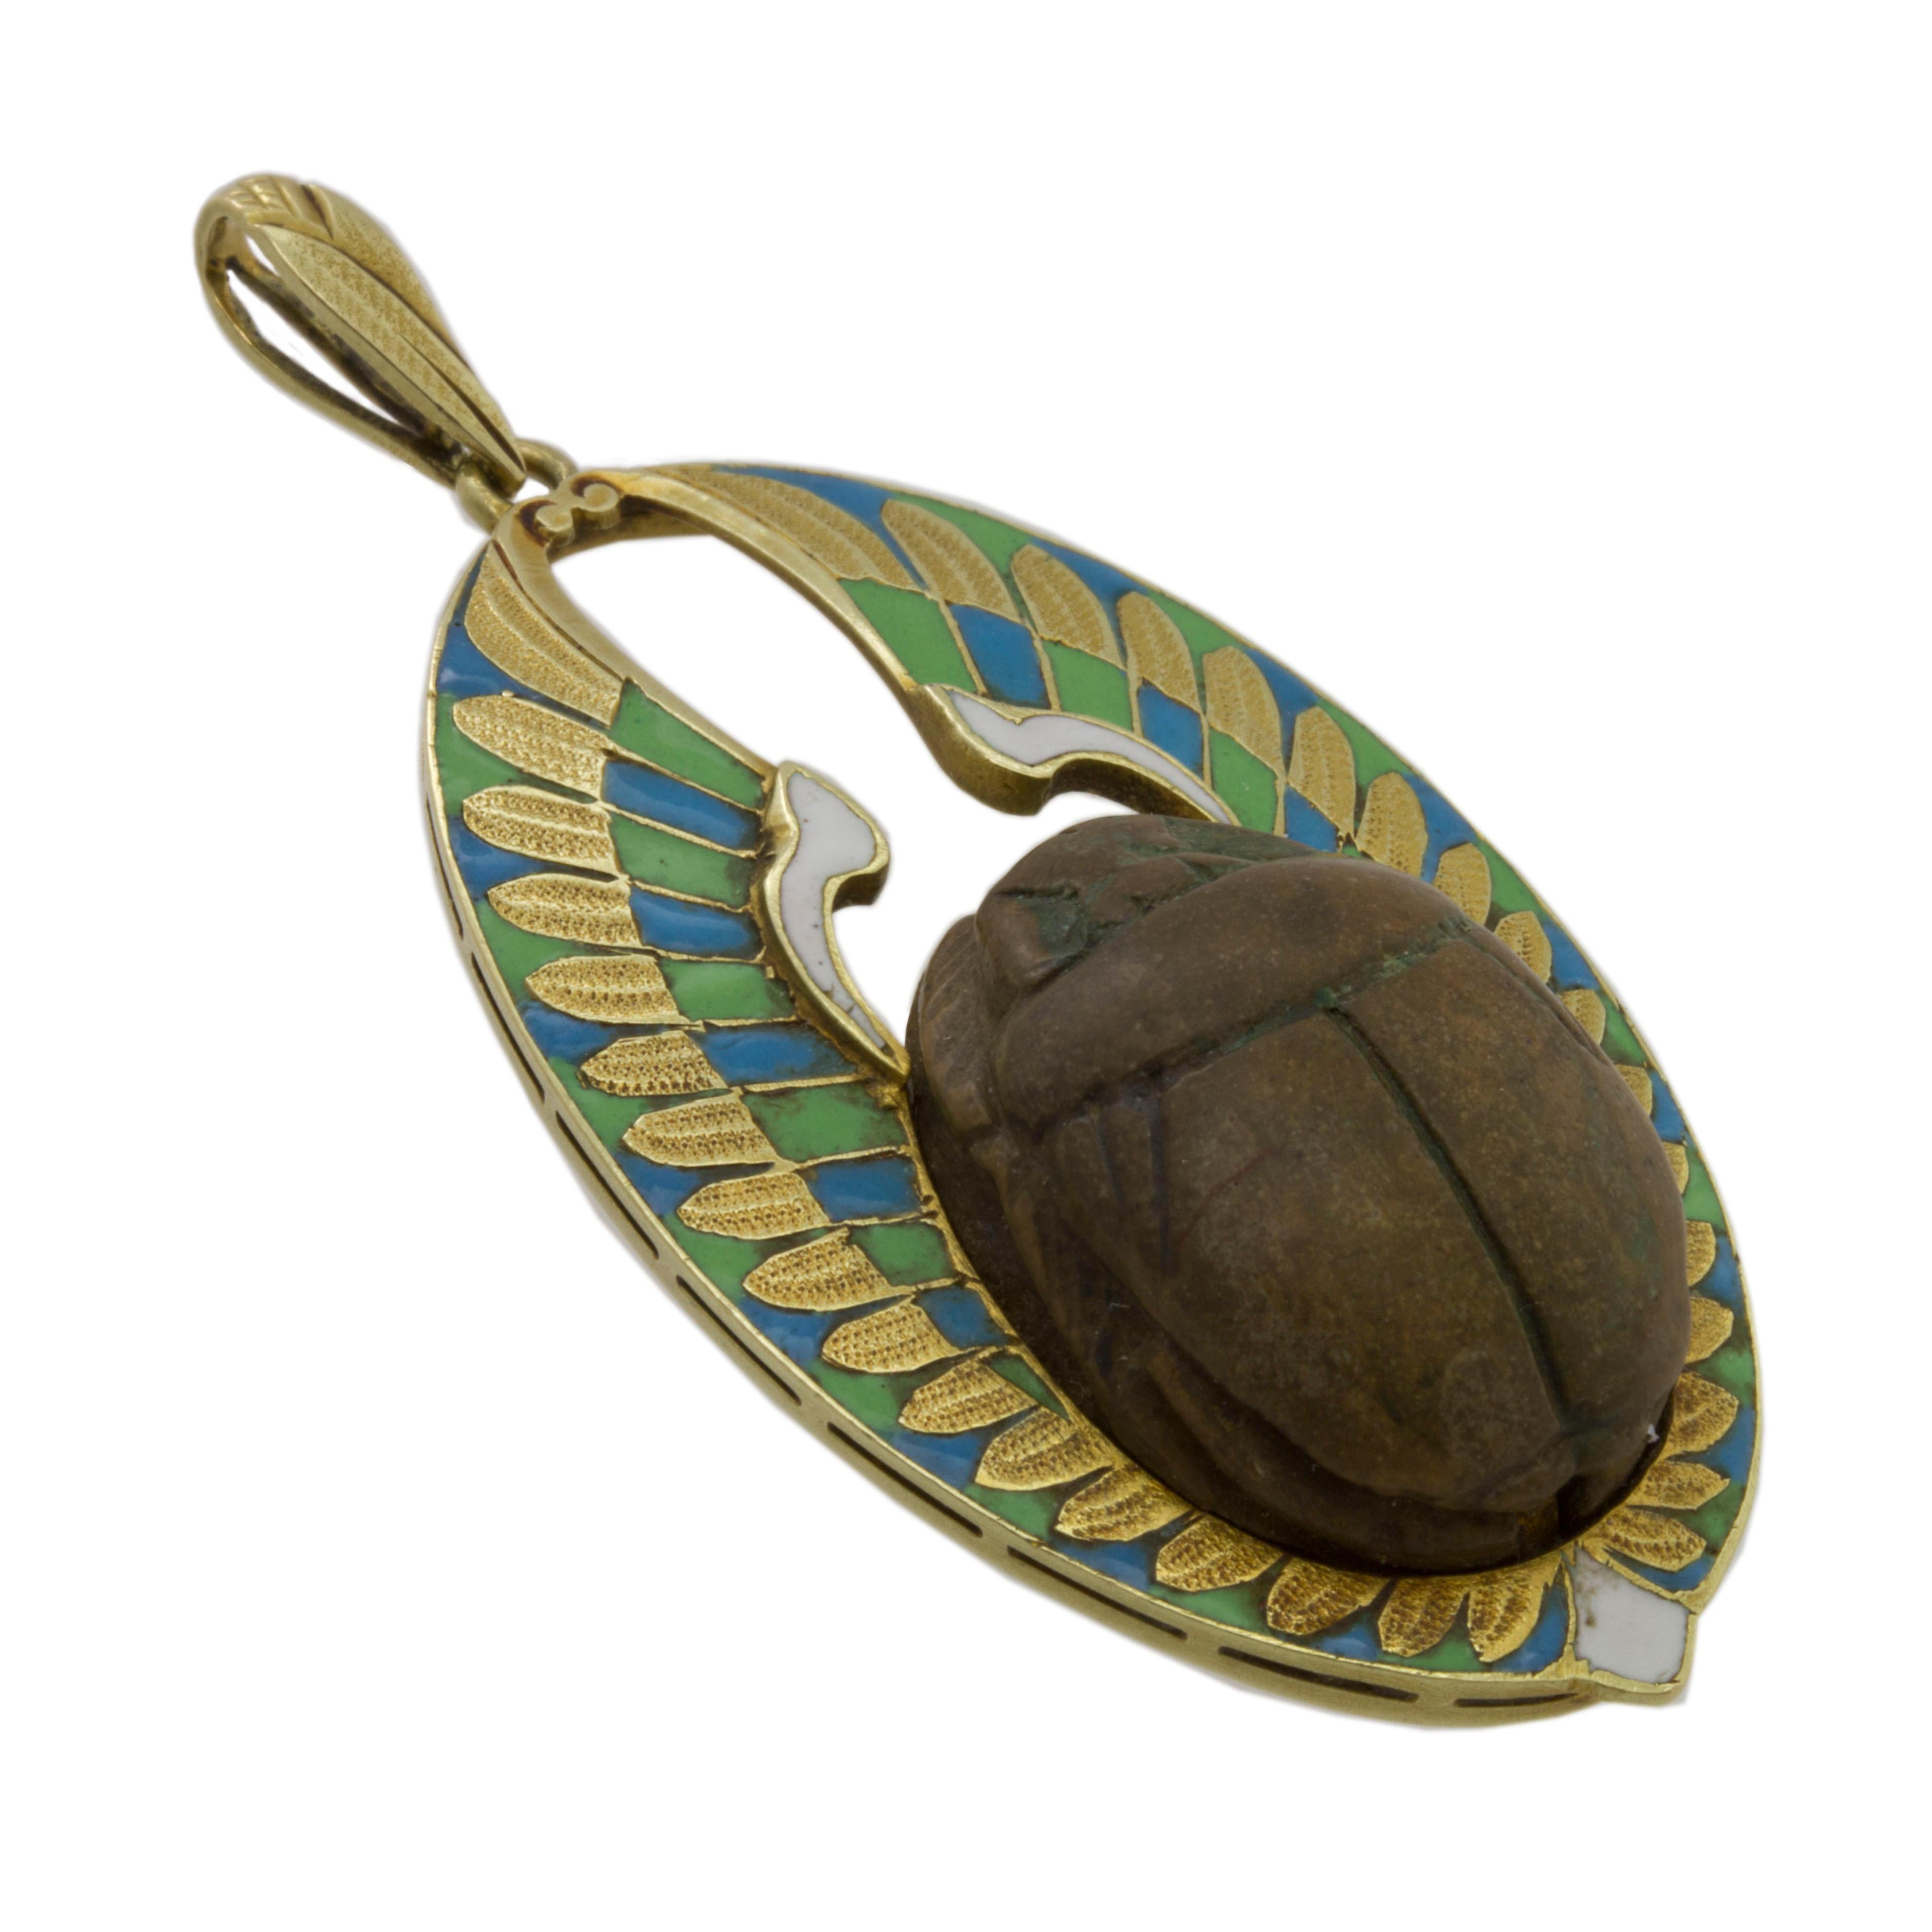 A Victorian scarab pendant, the Egyptian steatite scarab set within a yellow gold and enamel wing surround, marked 15ct gold, circa 1880, measuring approximately 4.9 x 2.3cm, gross weight 7.7 grams.

This antique pendant is in excellent condition.